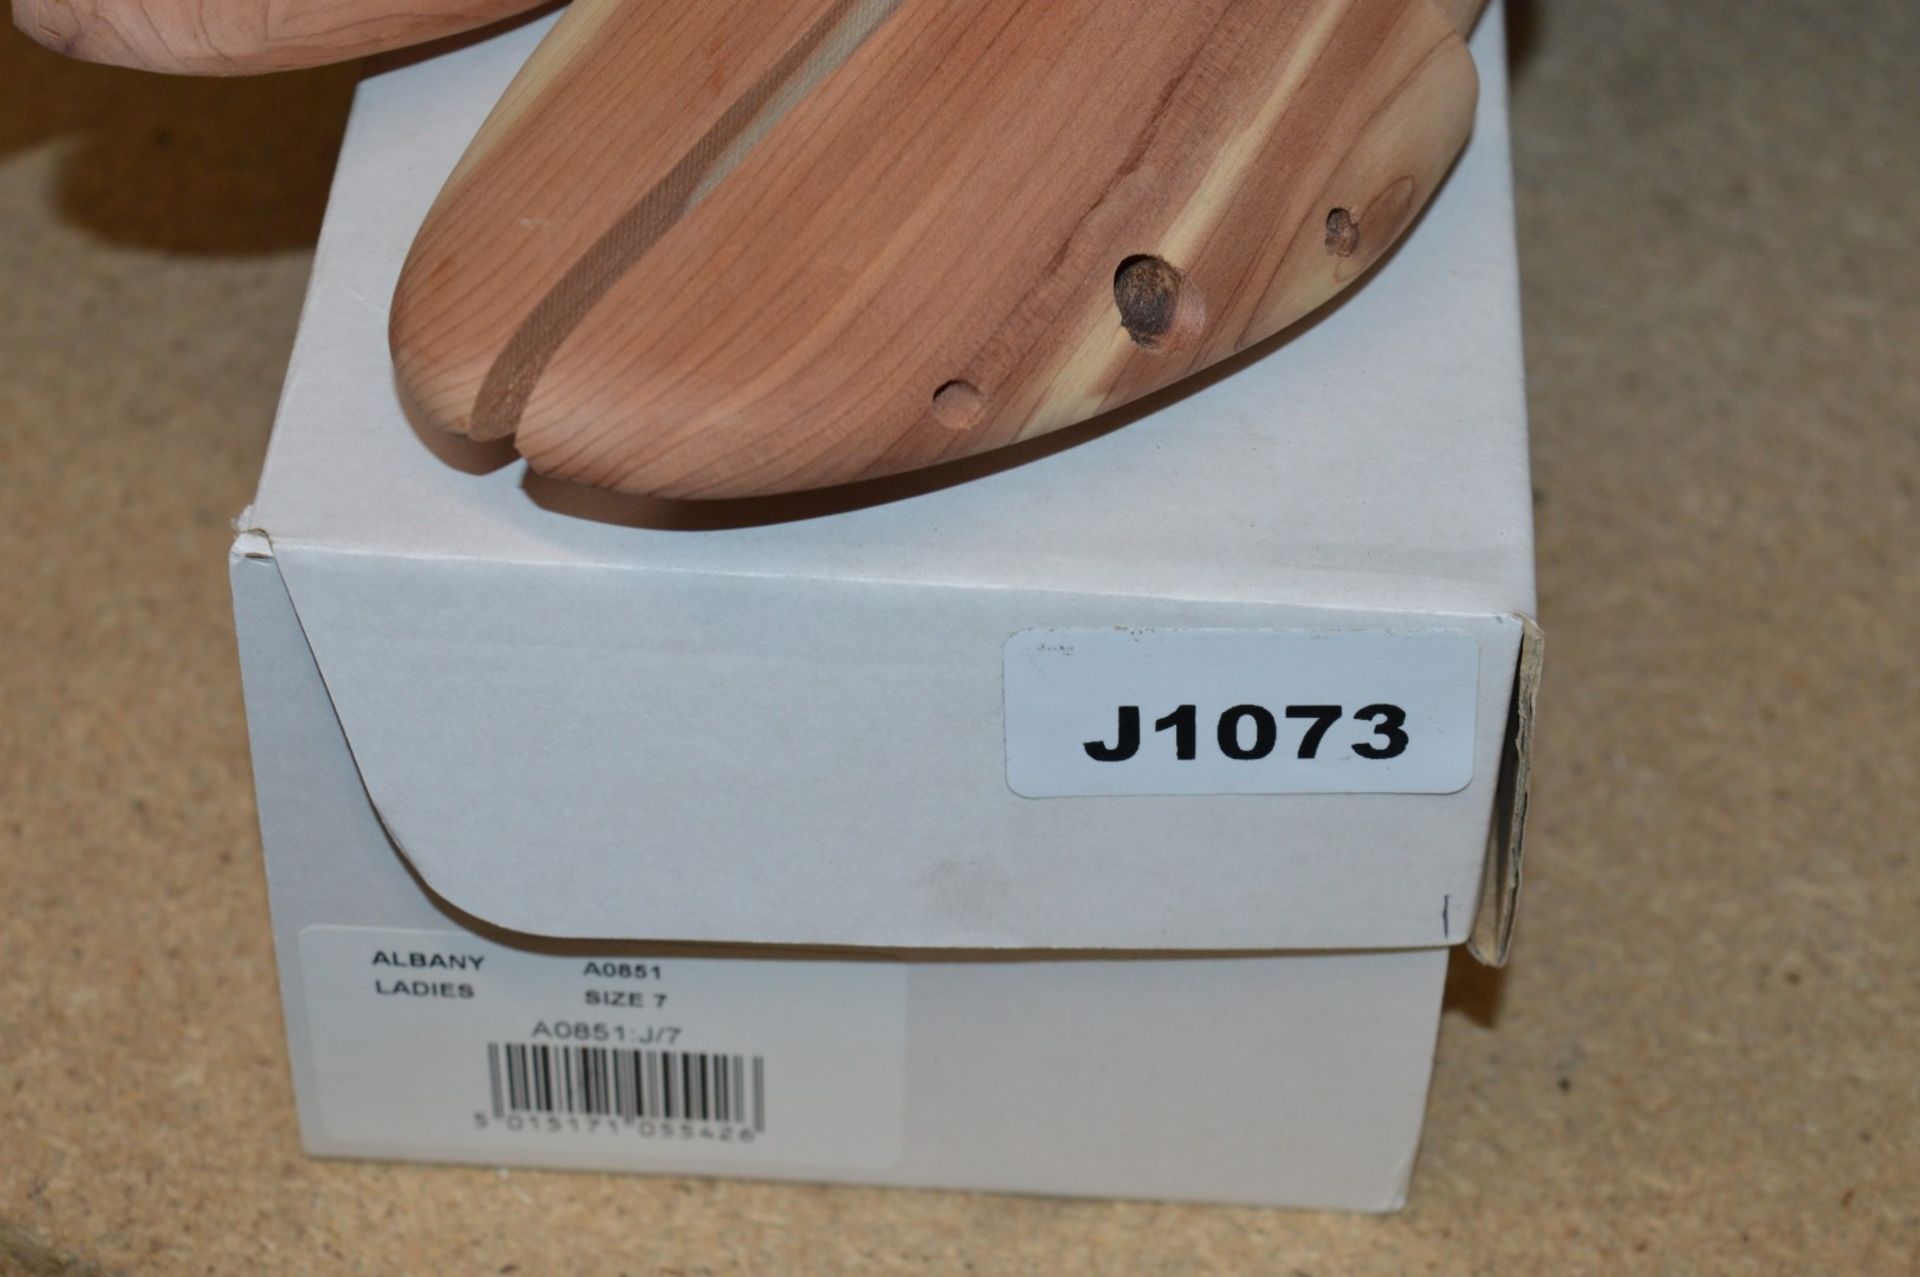 1 x Jones Bootmaker Albany Ladies Wooden Shoe Shaper - Size 7 - New and Boxed - CL285 - Ref - Image 2 of 4